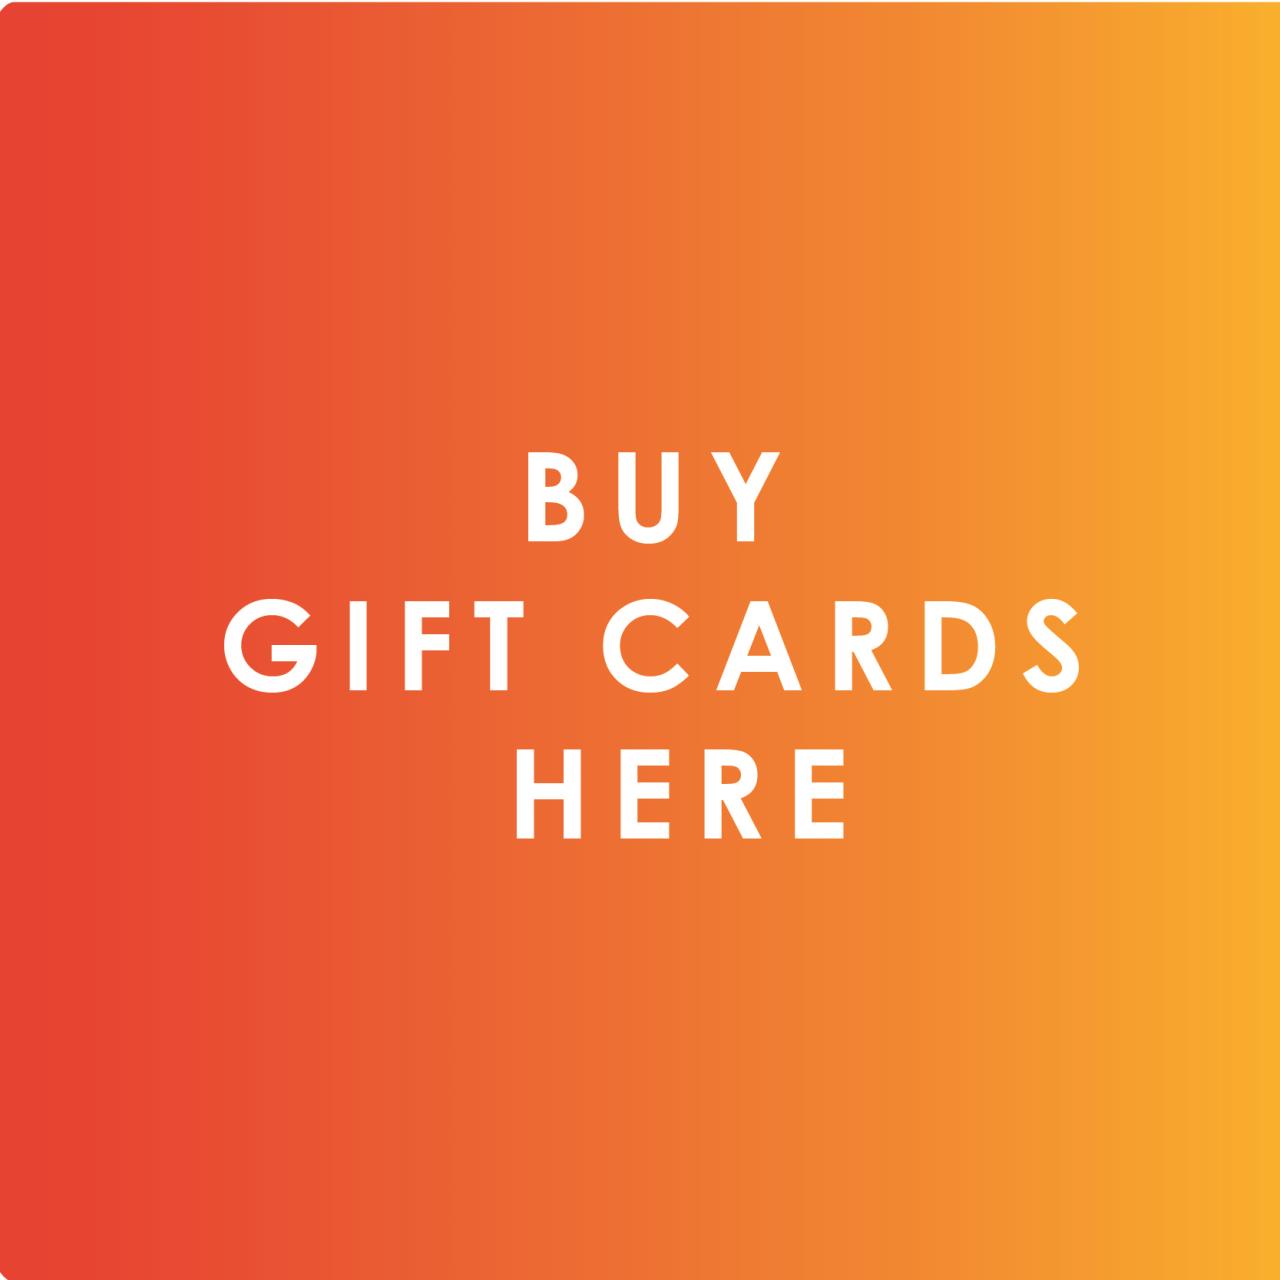 Buy Gift Cards Here